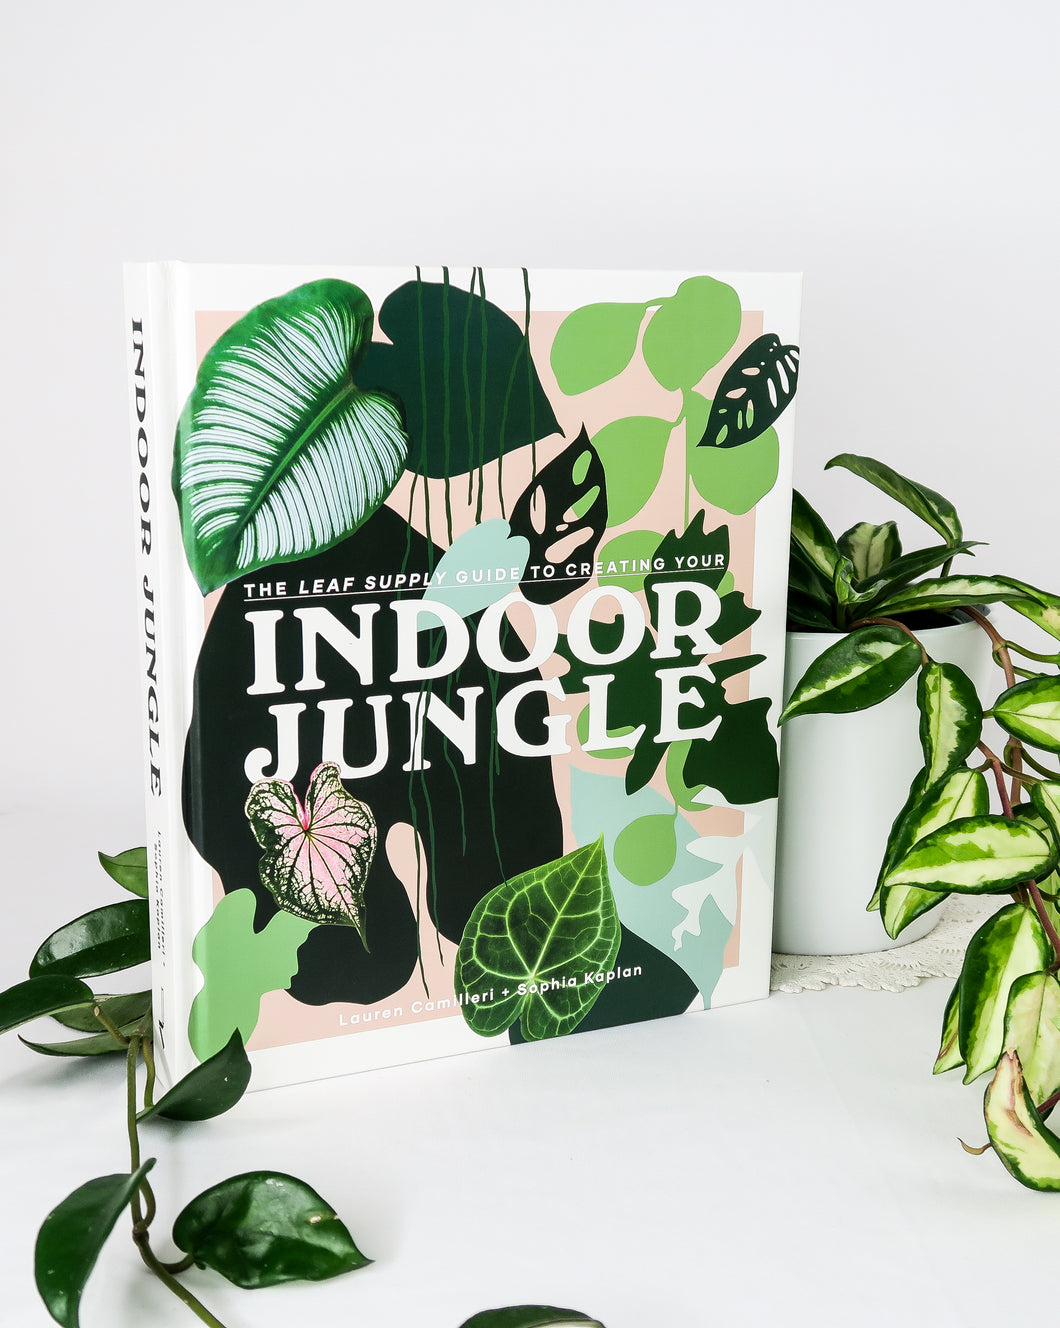 Indoor Jungle - the Leaf Supply Guide to Creating Your Indoor Jungle